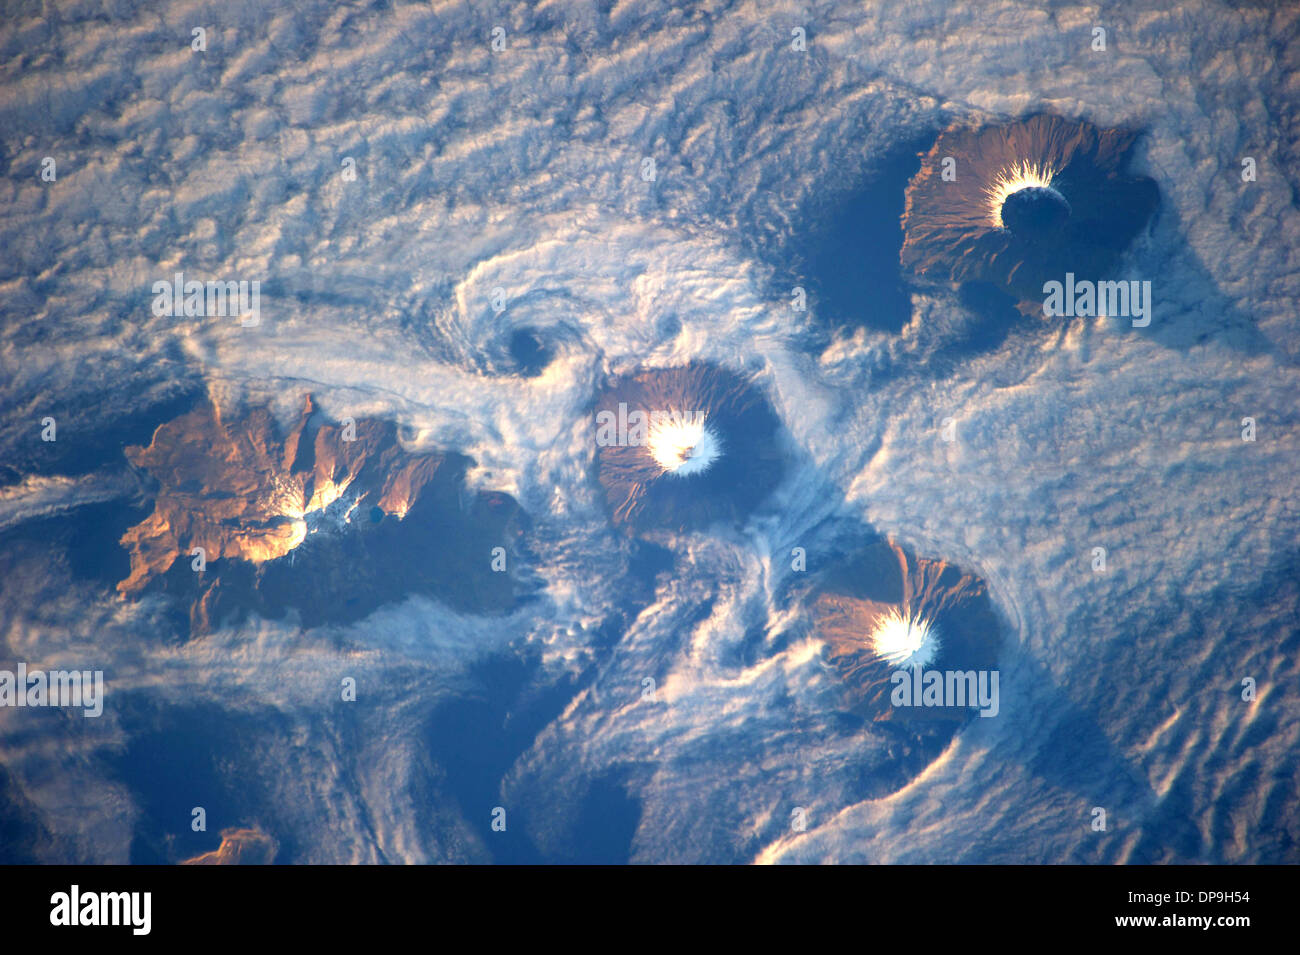 Islands of the Four Mountains of the Aleutian Island chain, Carlisle, Cleveland, Herbert, and Tana volcanoes. Stock Photo